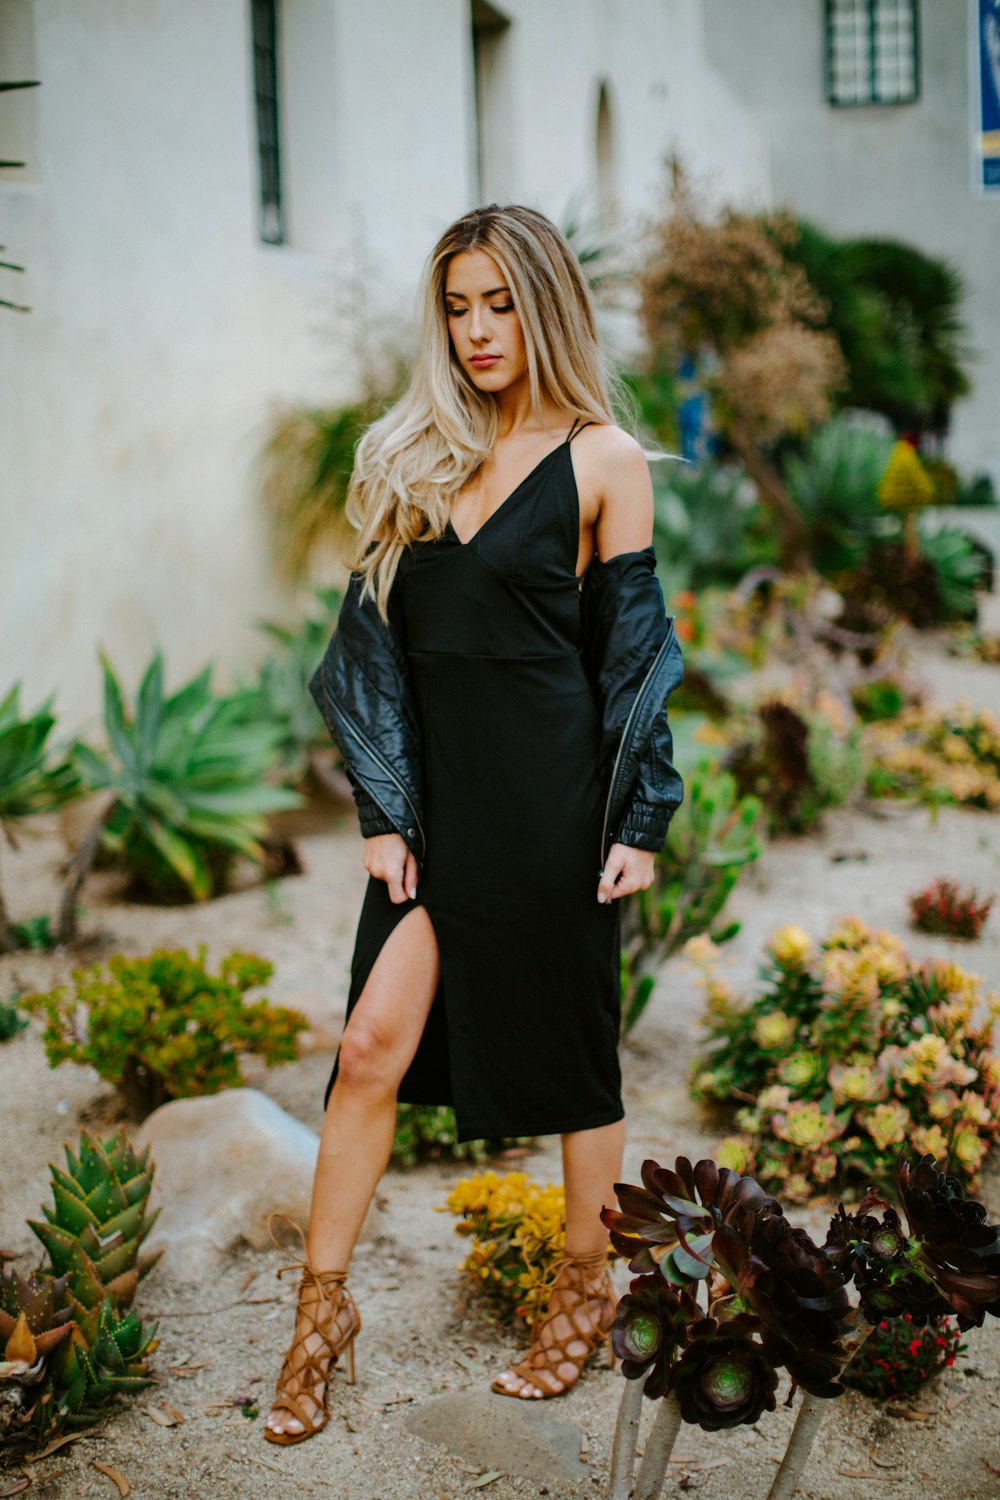 woman in black off shoulder dress standing on brown dried leaves during daytime